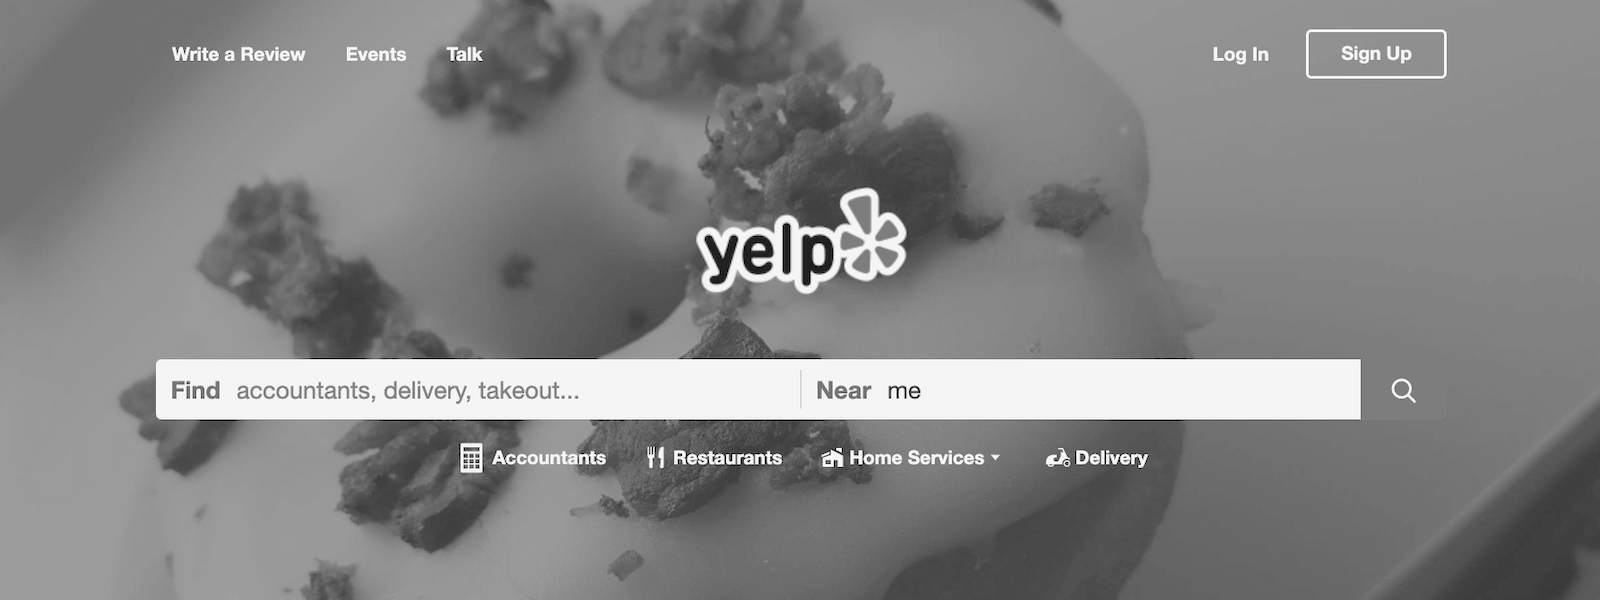 How to Remove (Fake or Bad) Yelp Reviews and Complaints